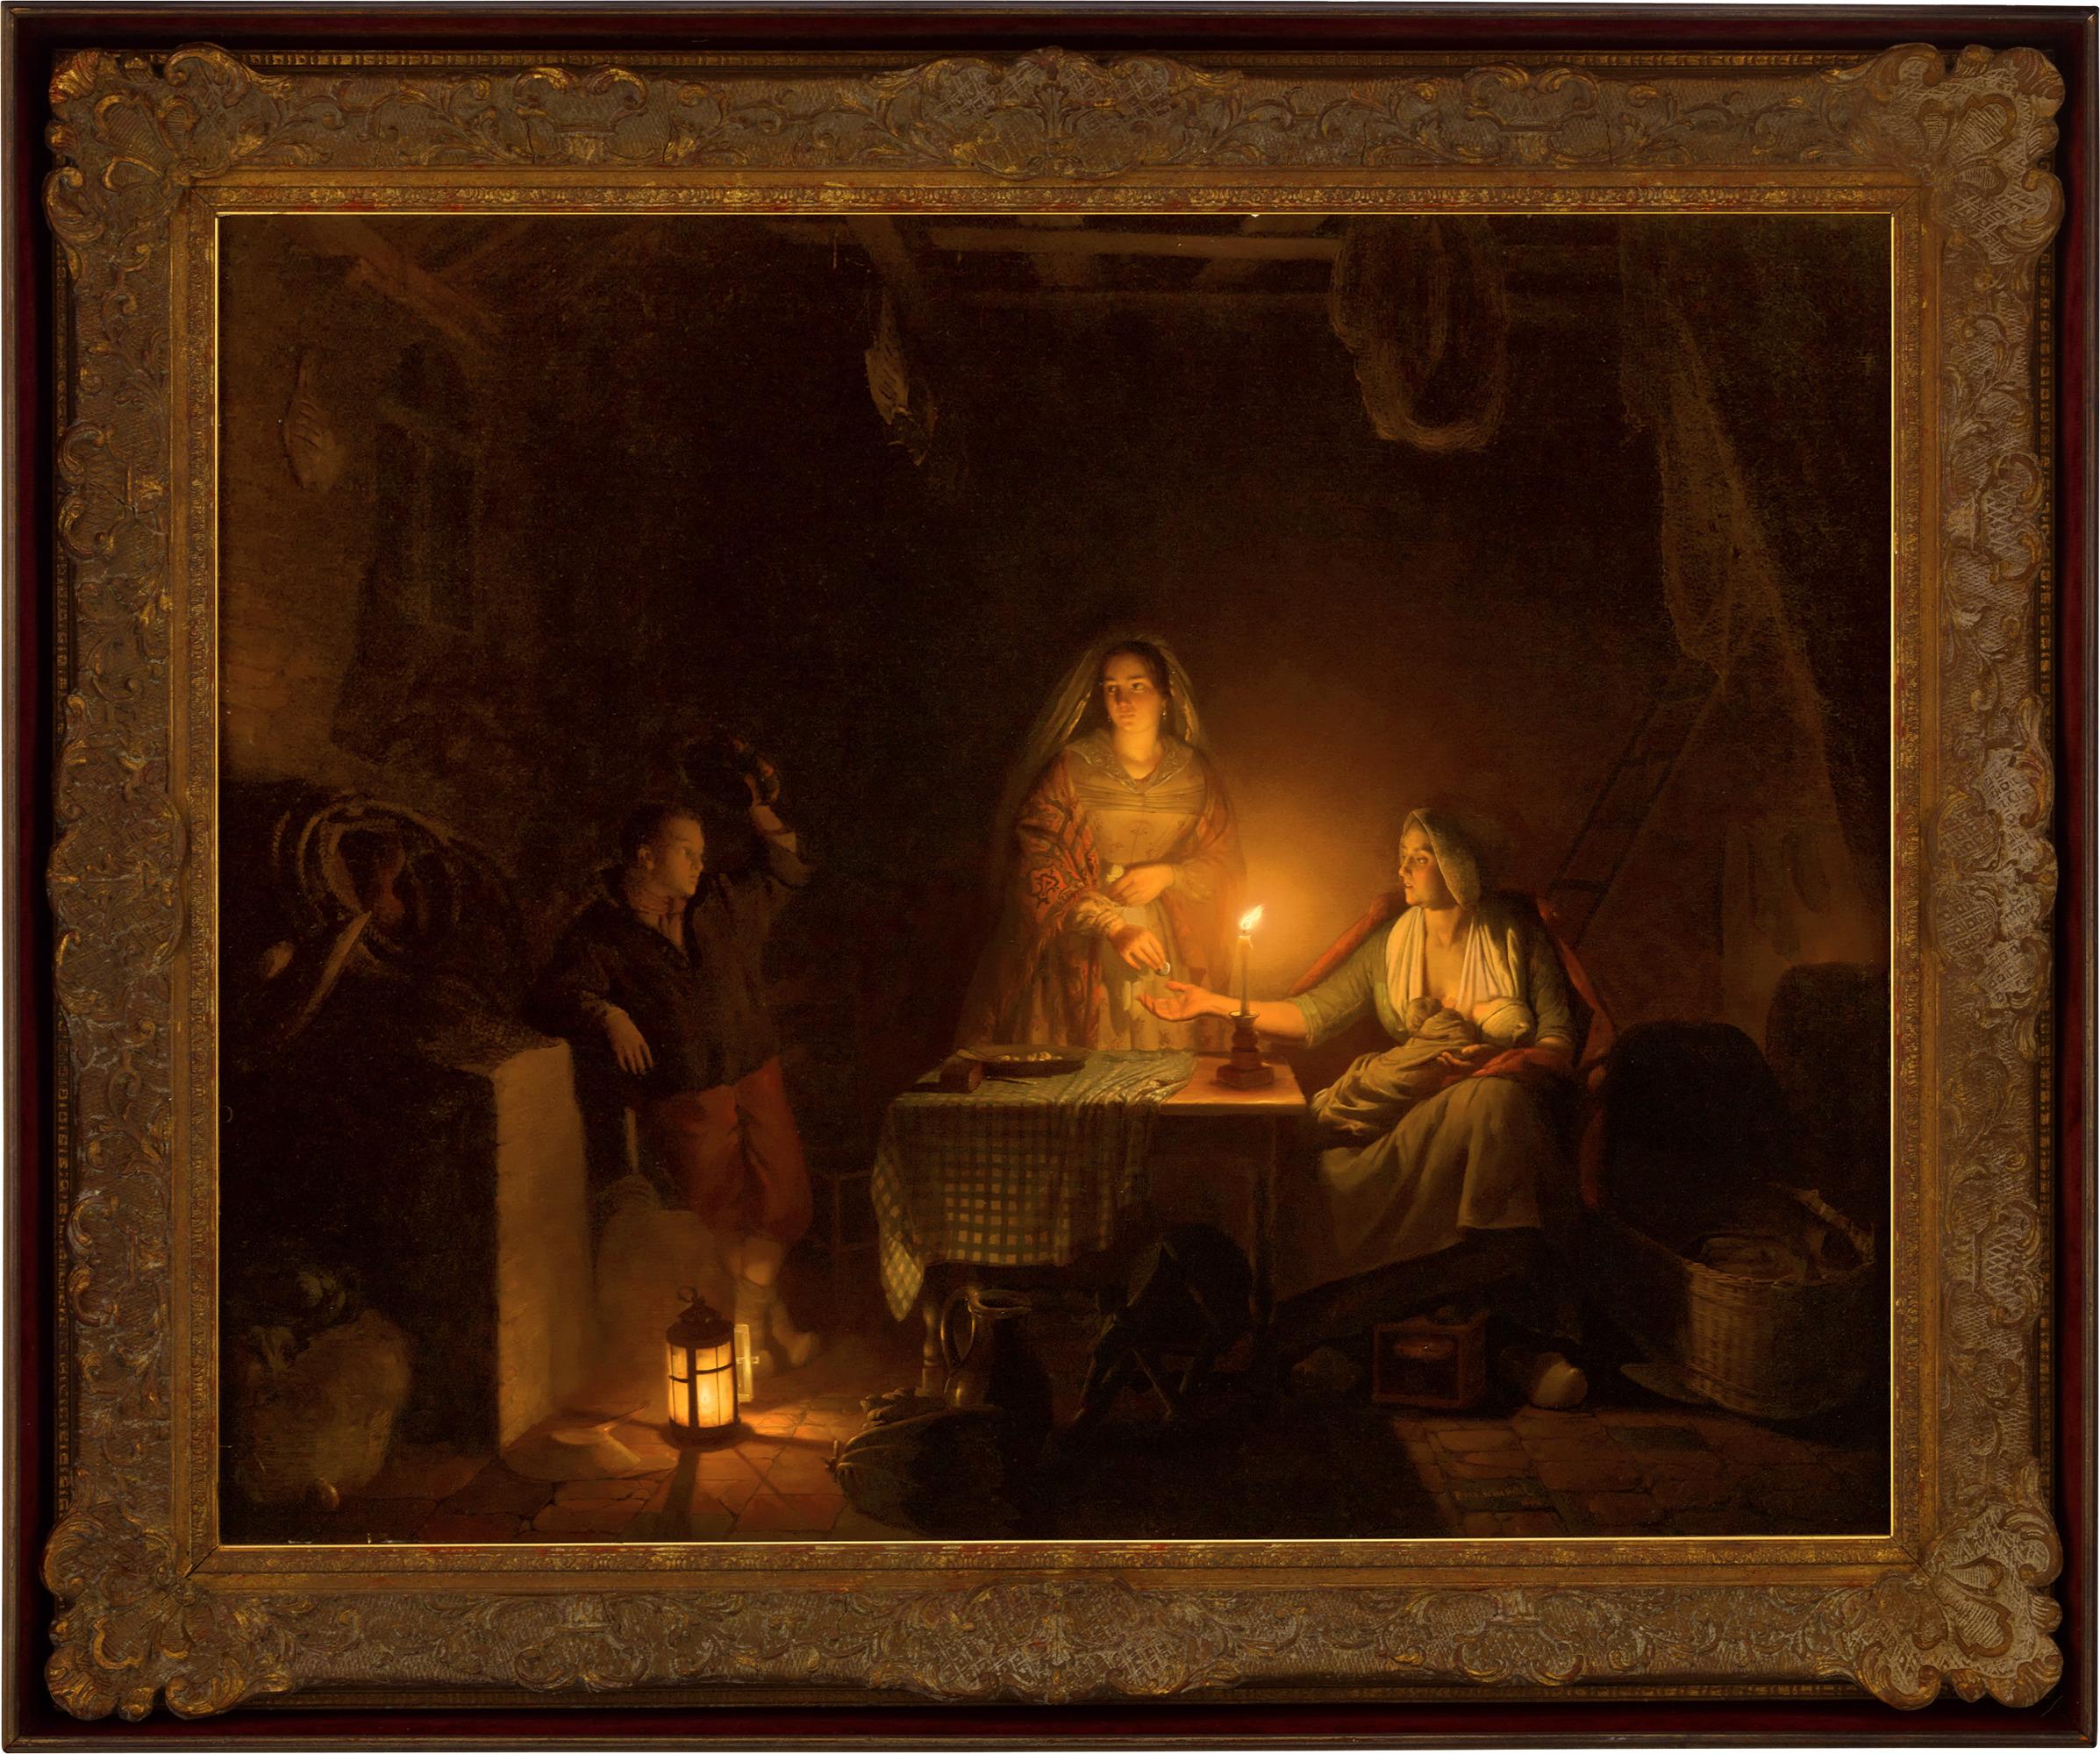 By Candlelight By Petrus Van Schendel 1